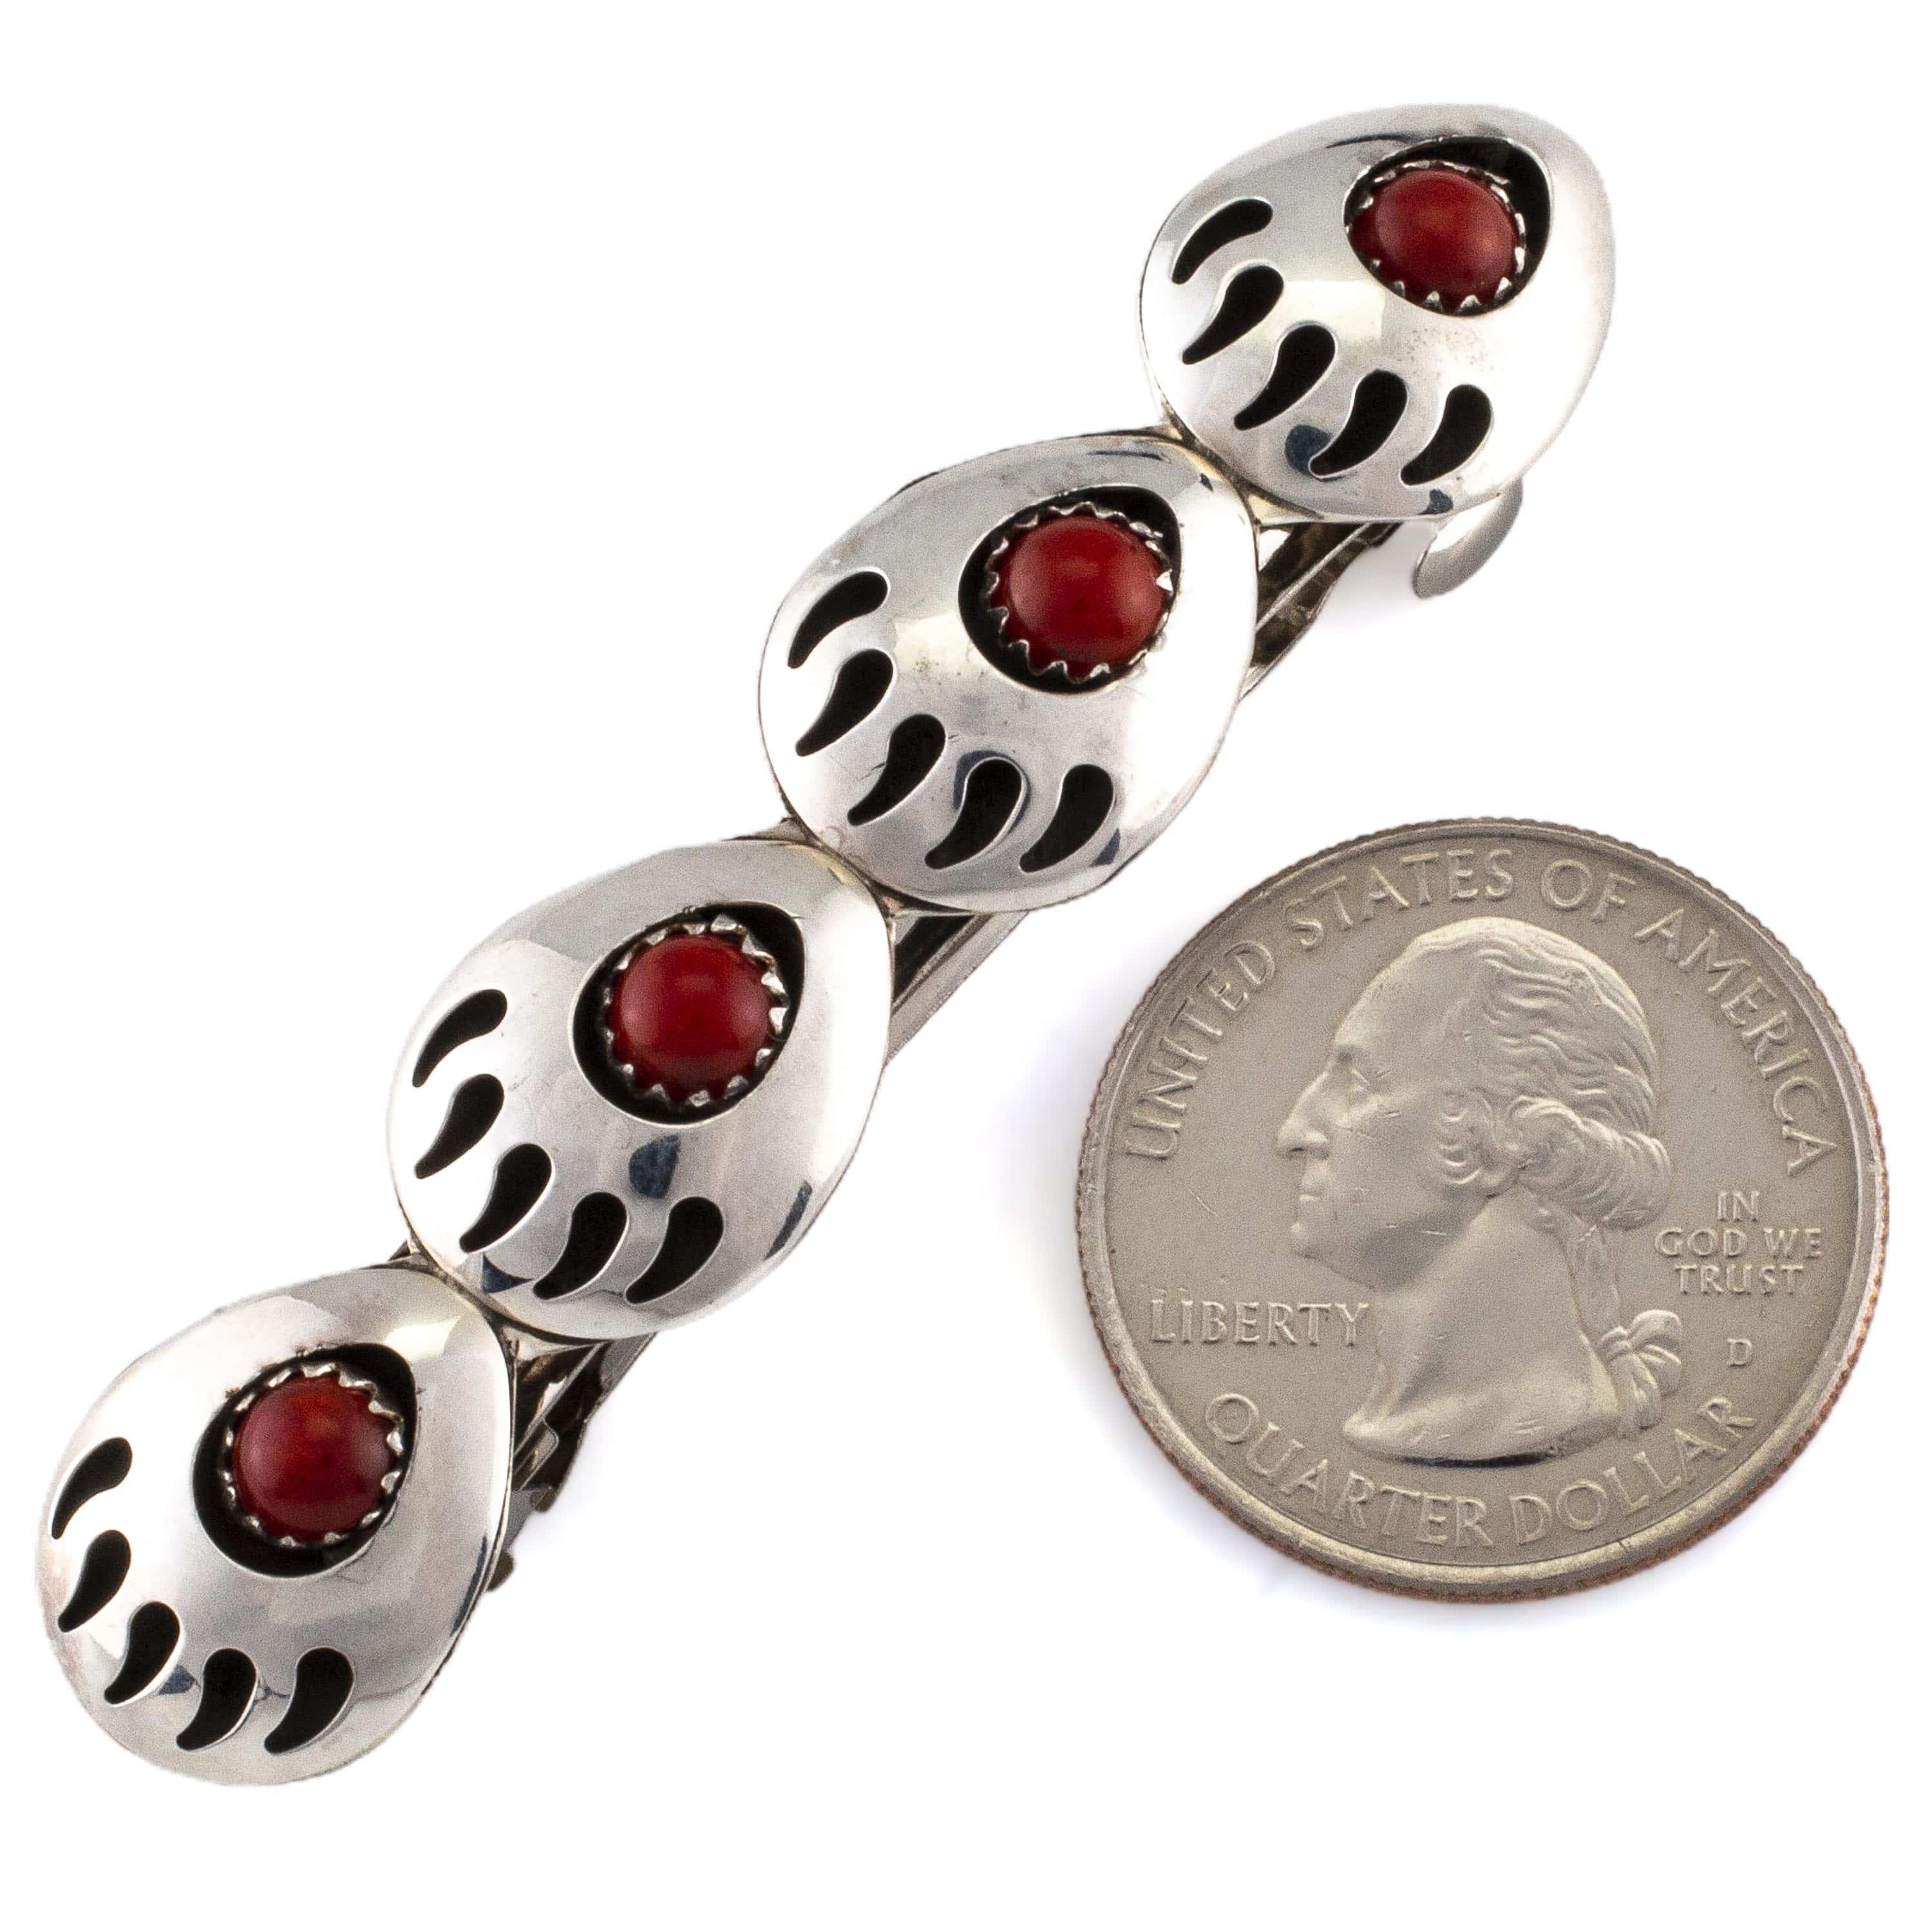 Kalifano Native American Jewelry Virginia Long Quadruple Bear Paw with Coral Inlay USA Native American Made 925 Sterling Silver Hair Barrette NAH160.002